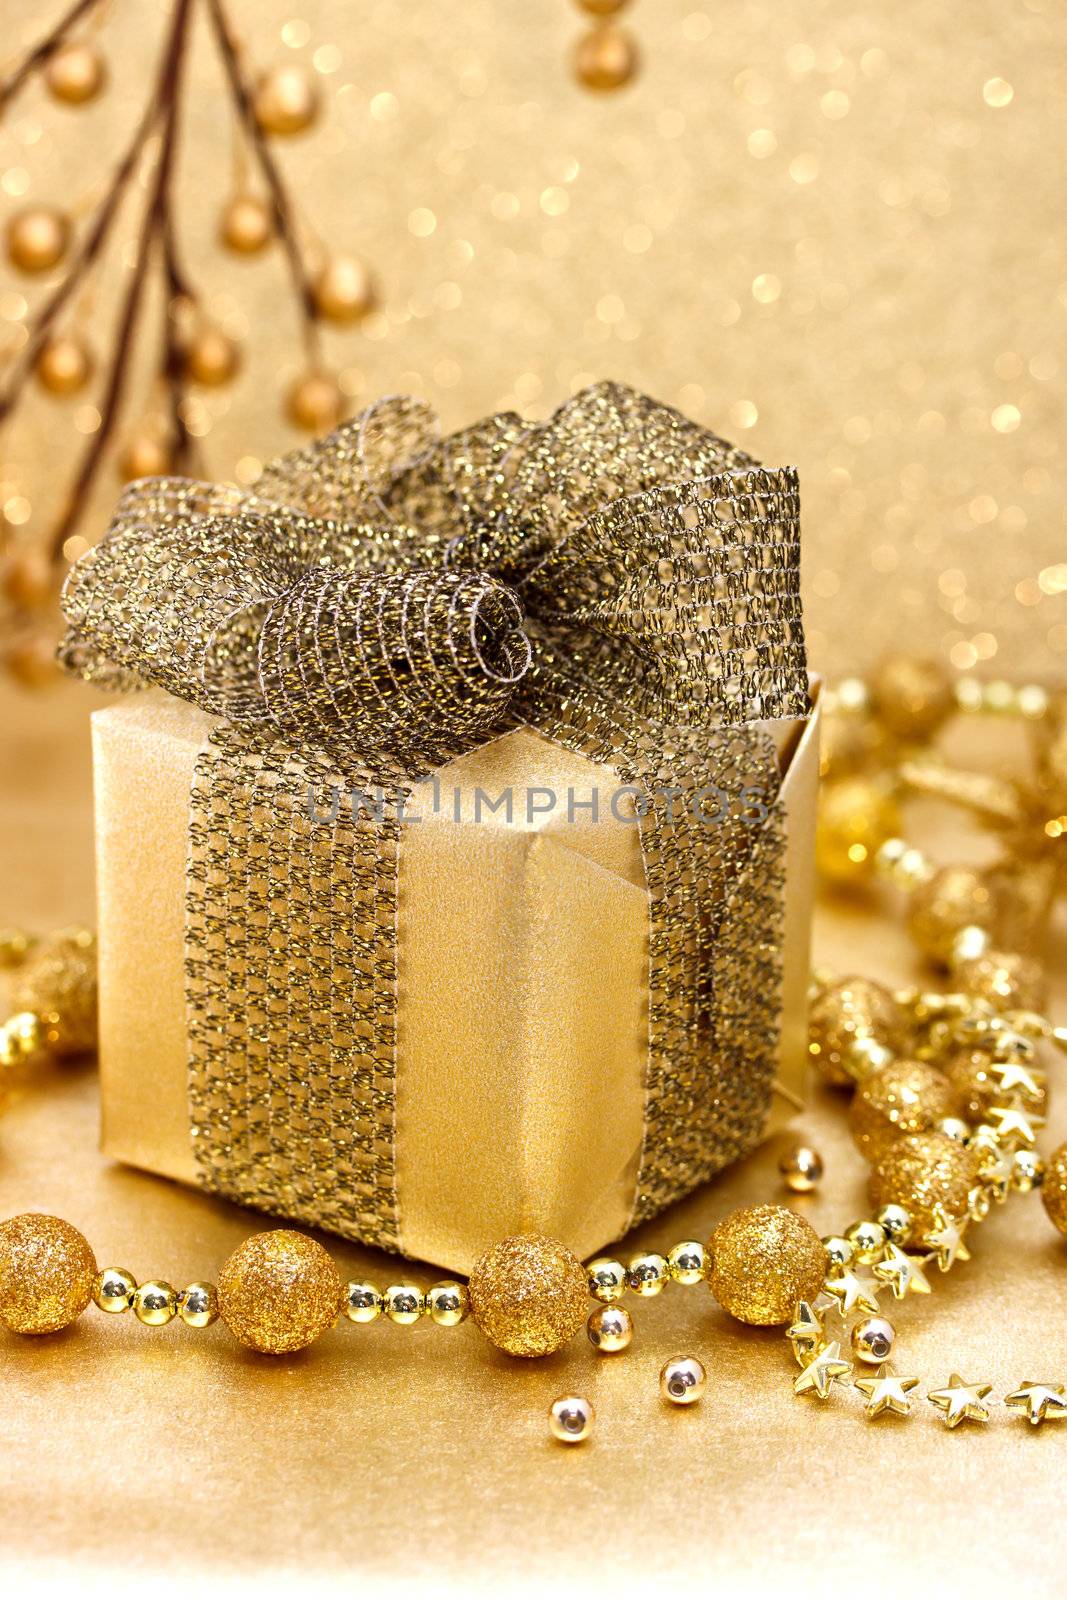 Golden colored image of Christmas gift